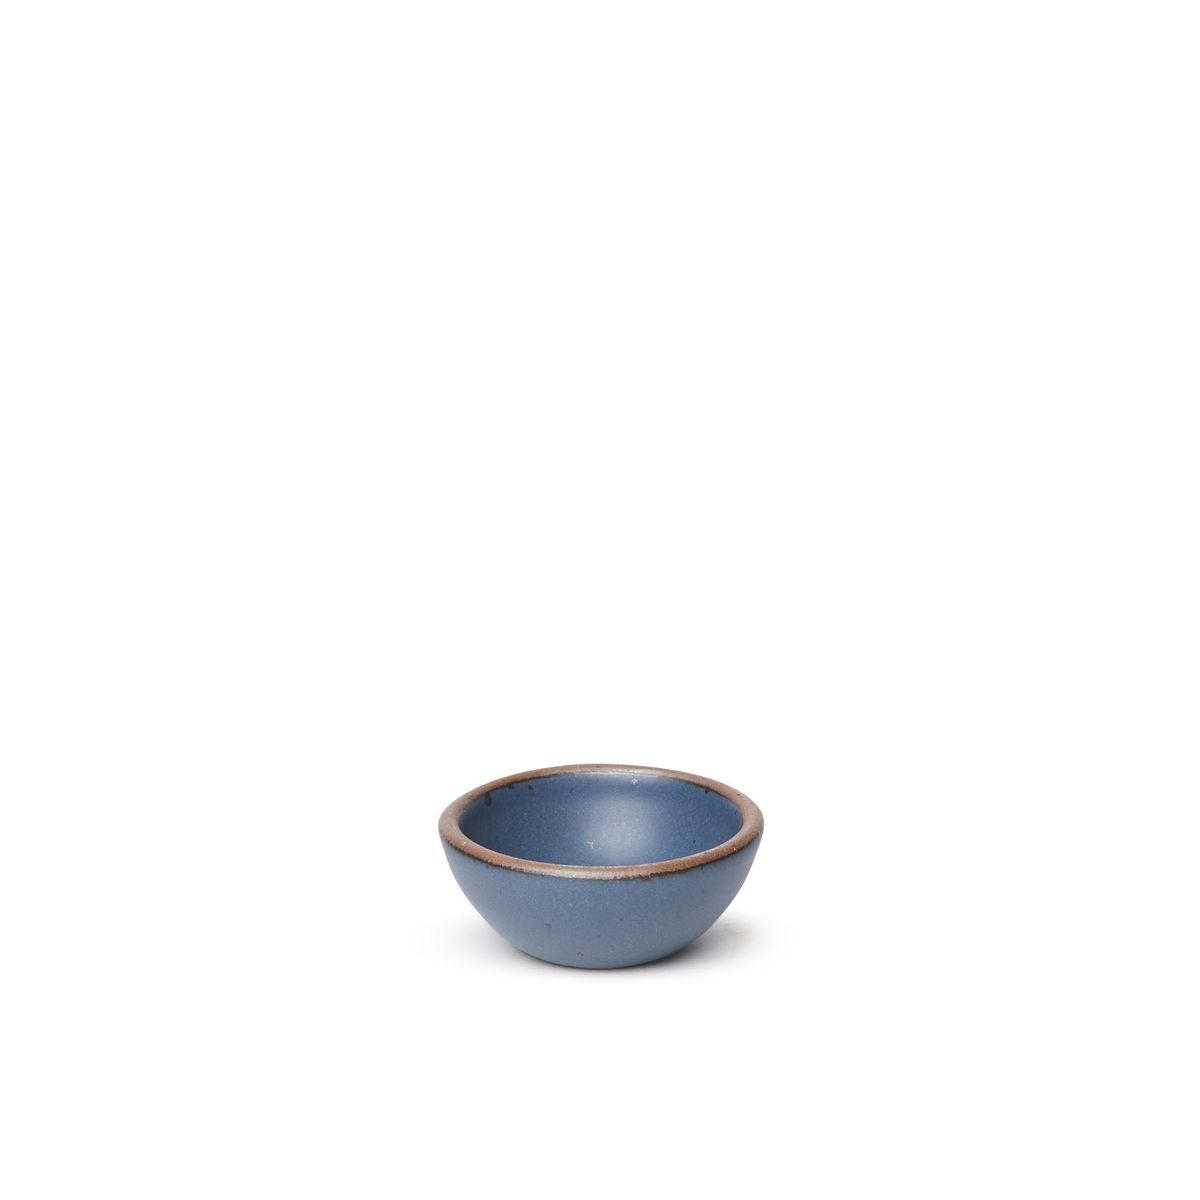 A tiny rounded ceramic bowl in a toned-down navy color featuring iron speckles and an unglazed rim